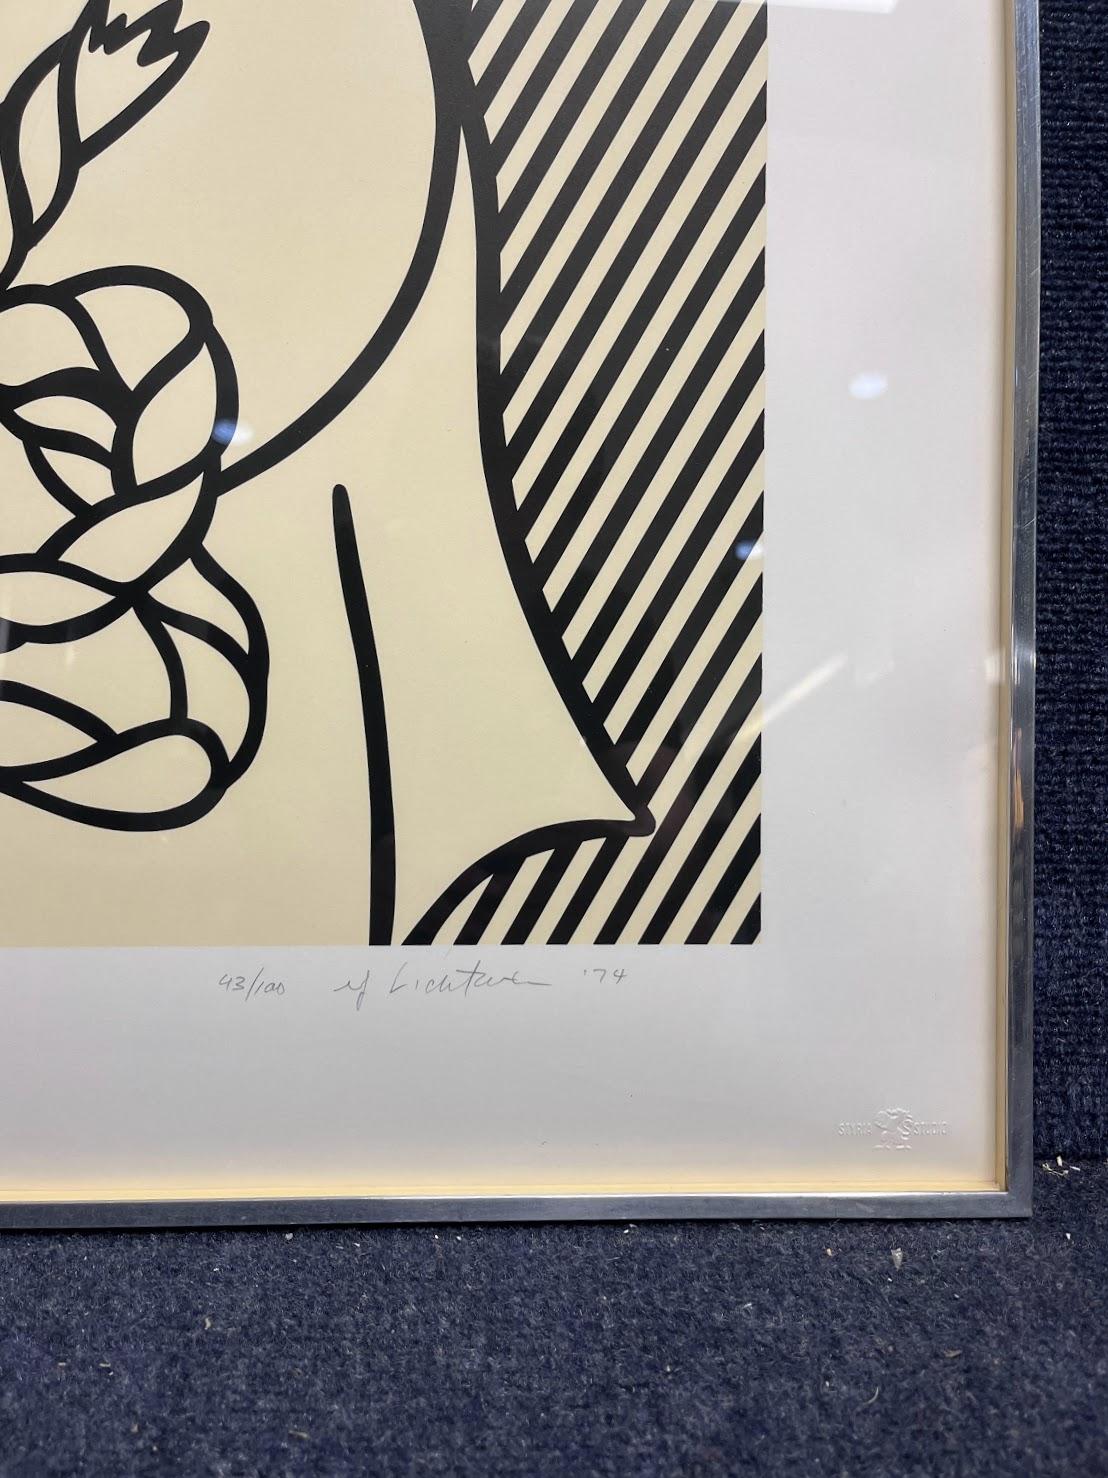 ROY LICHTENSTEIN (1923-1997)

Roy Lichtenstein's 'Still Life with Lobster' is a 1974 color lithograph and silkscreen. This work is signed, dated 'Lichtenstein '74' and numbered 43/100. This work in good condition and framed with slight fading to the